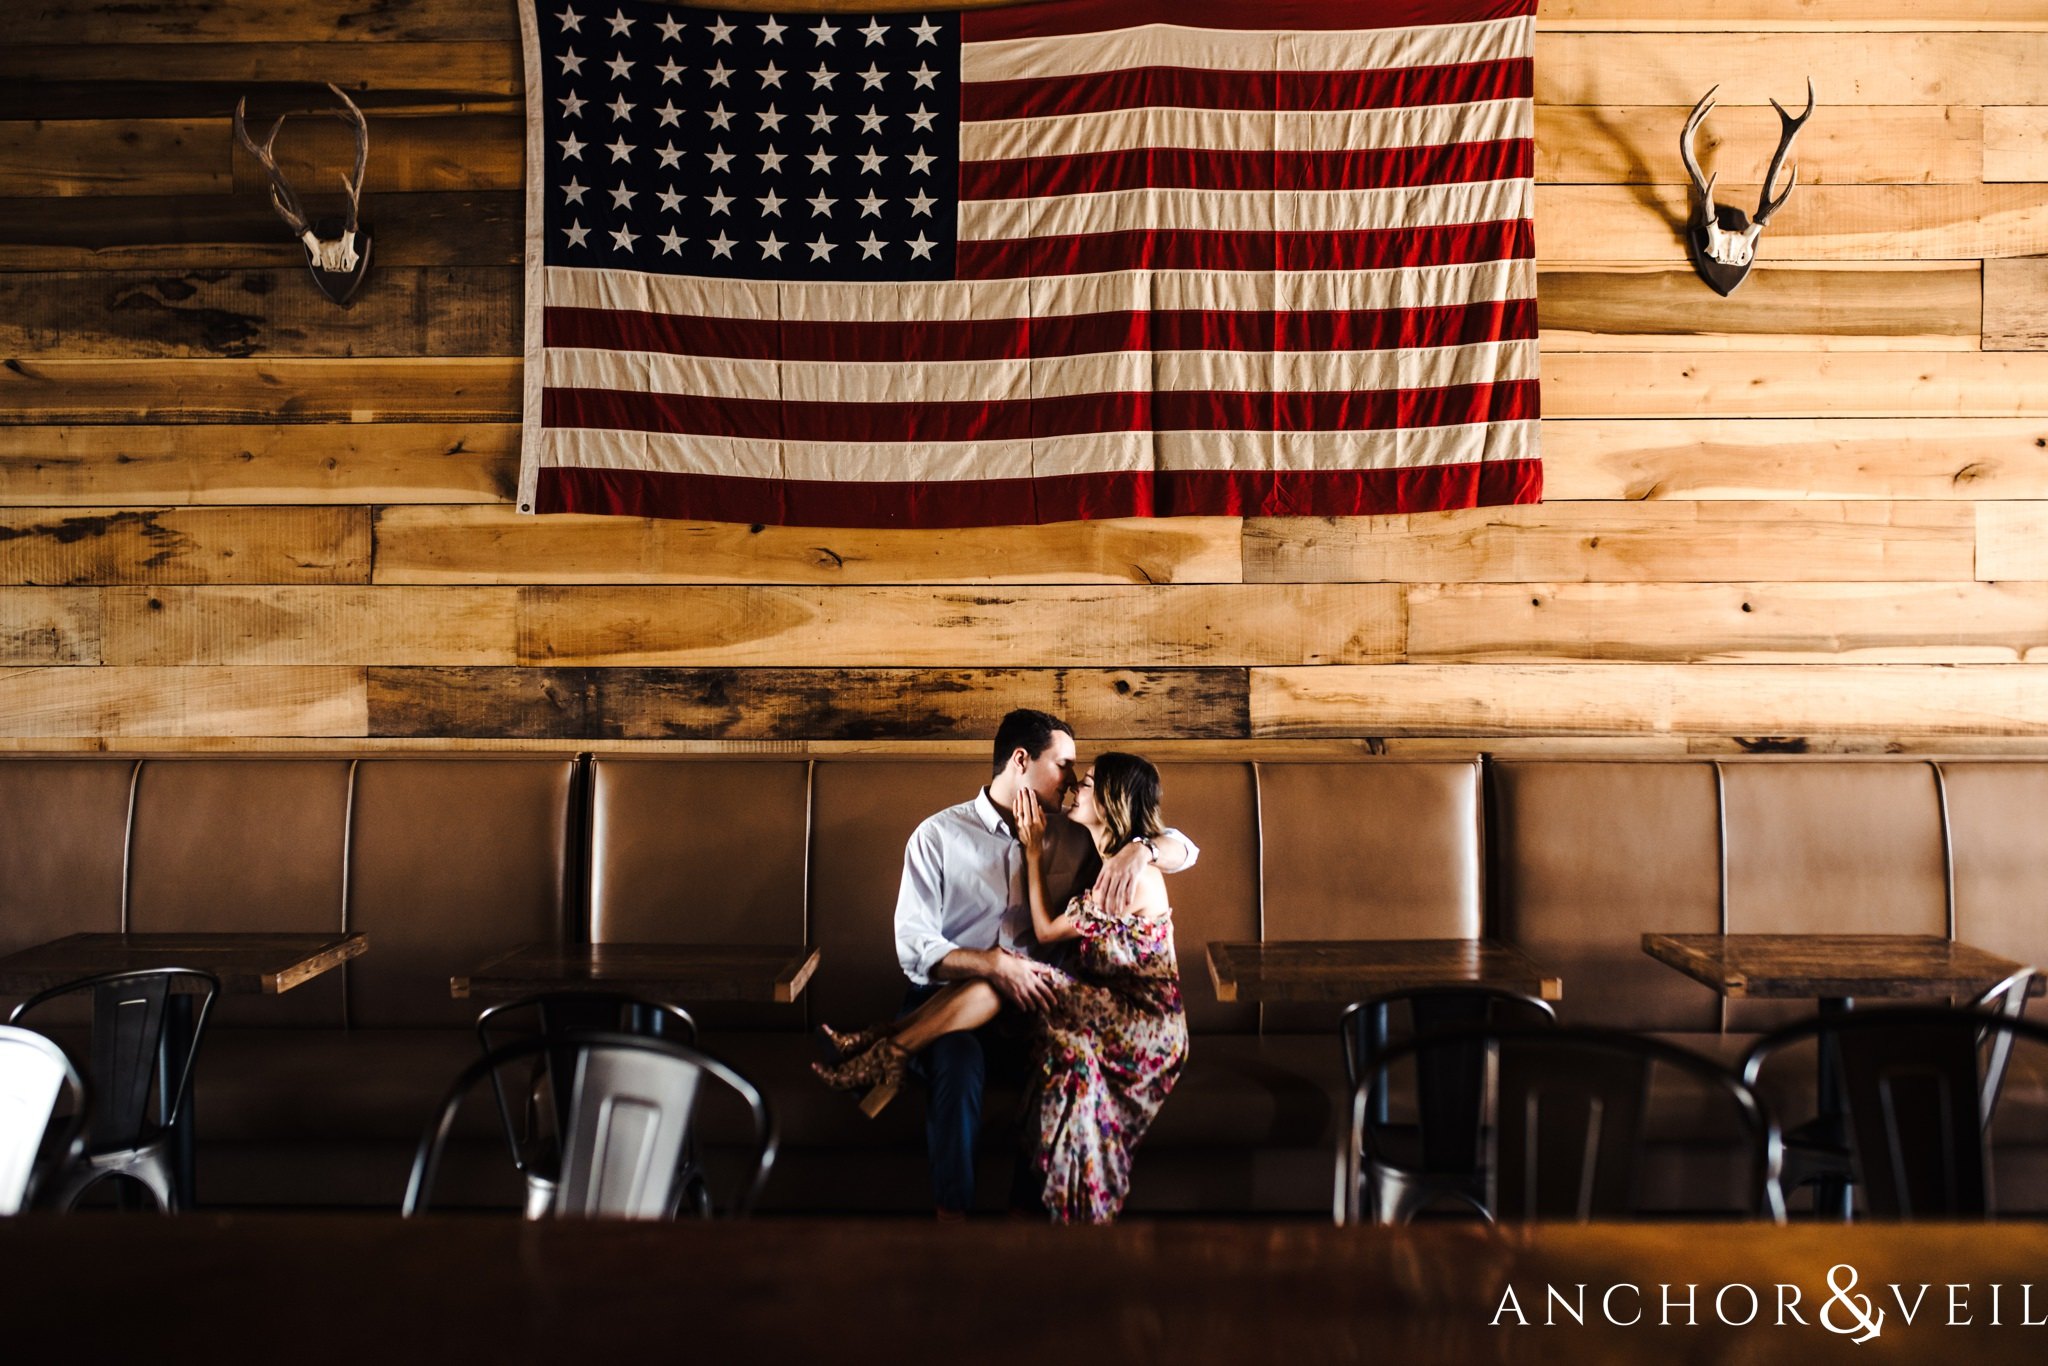 American flag during the Uptown Charlotte Sycamore Brewery Engagement Session